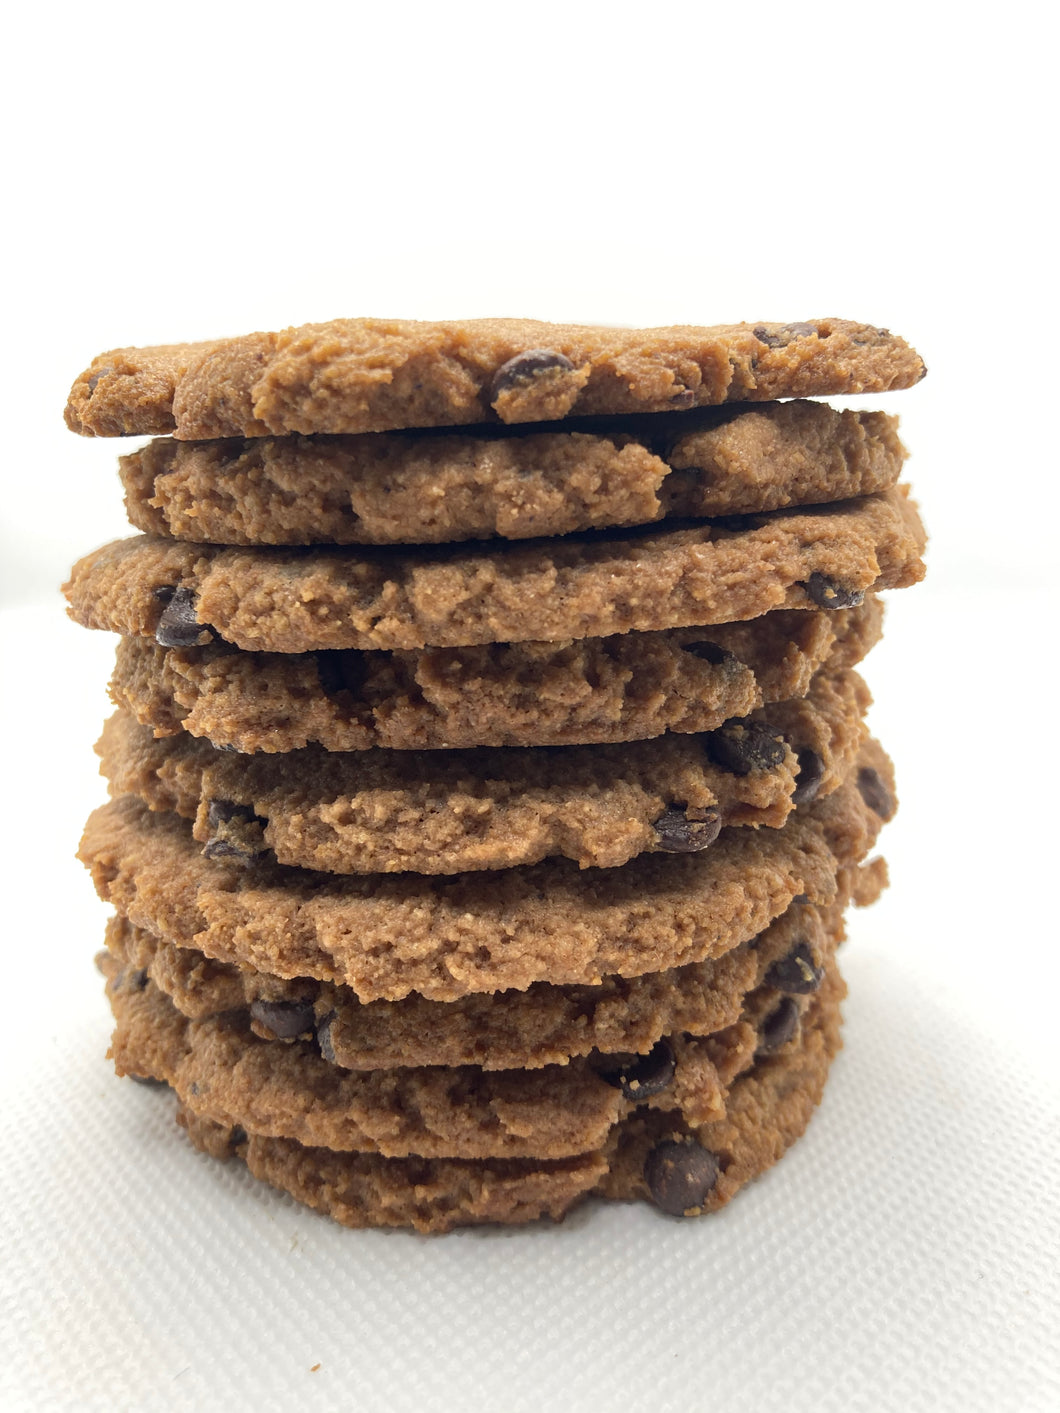 Chocolate Chip Cookies Keto, Paleo and Diabetic Friendly and Gluten Free.